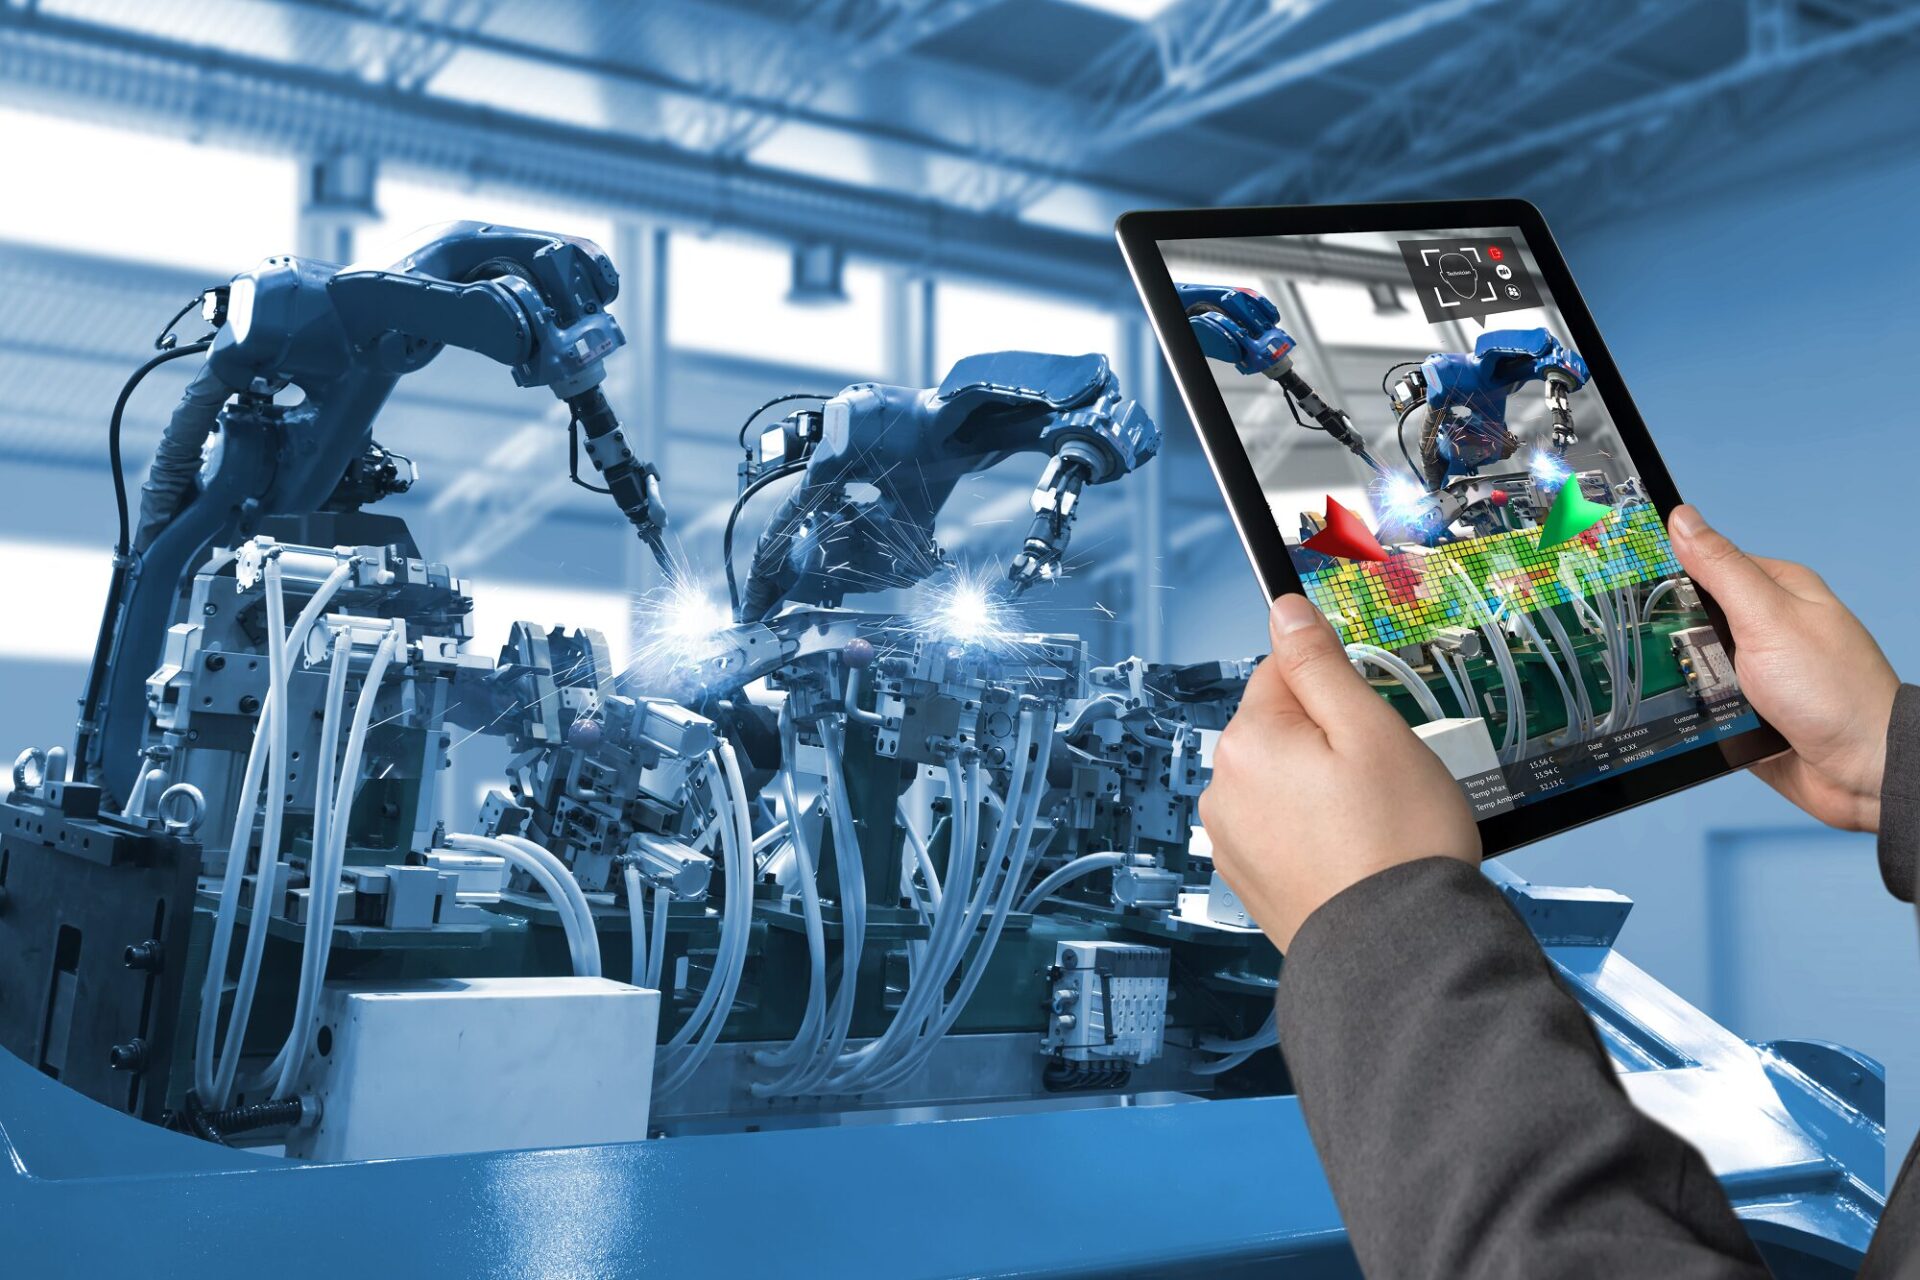 Digital Manufacturing Software Market Size, Share, Upcoming Trends, Growth Analysis By 2032